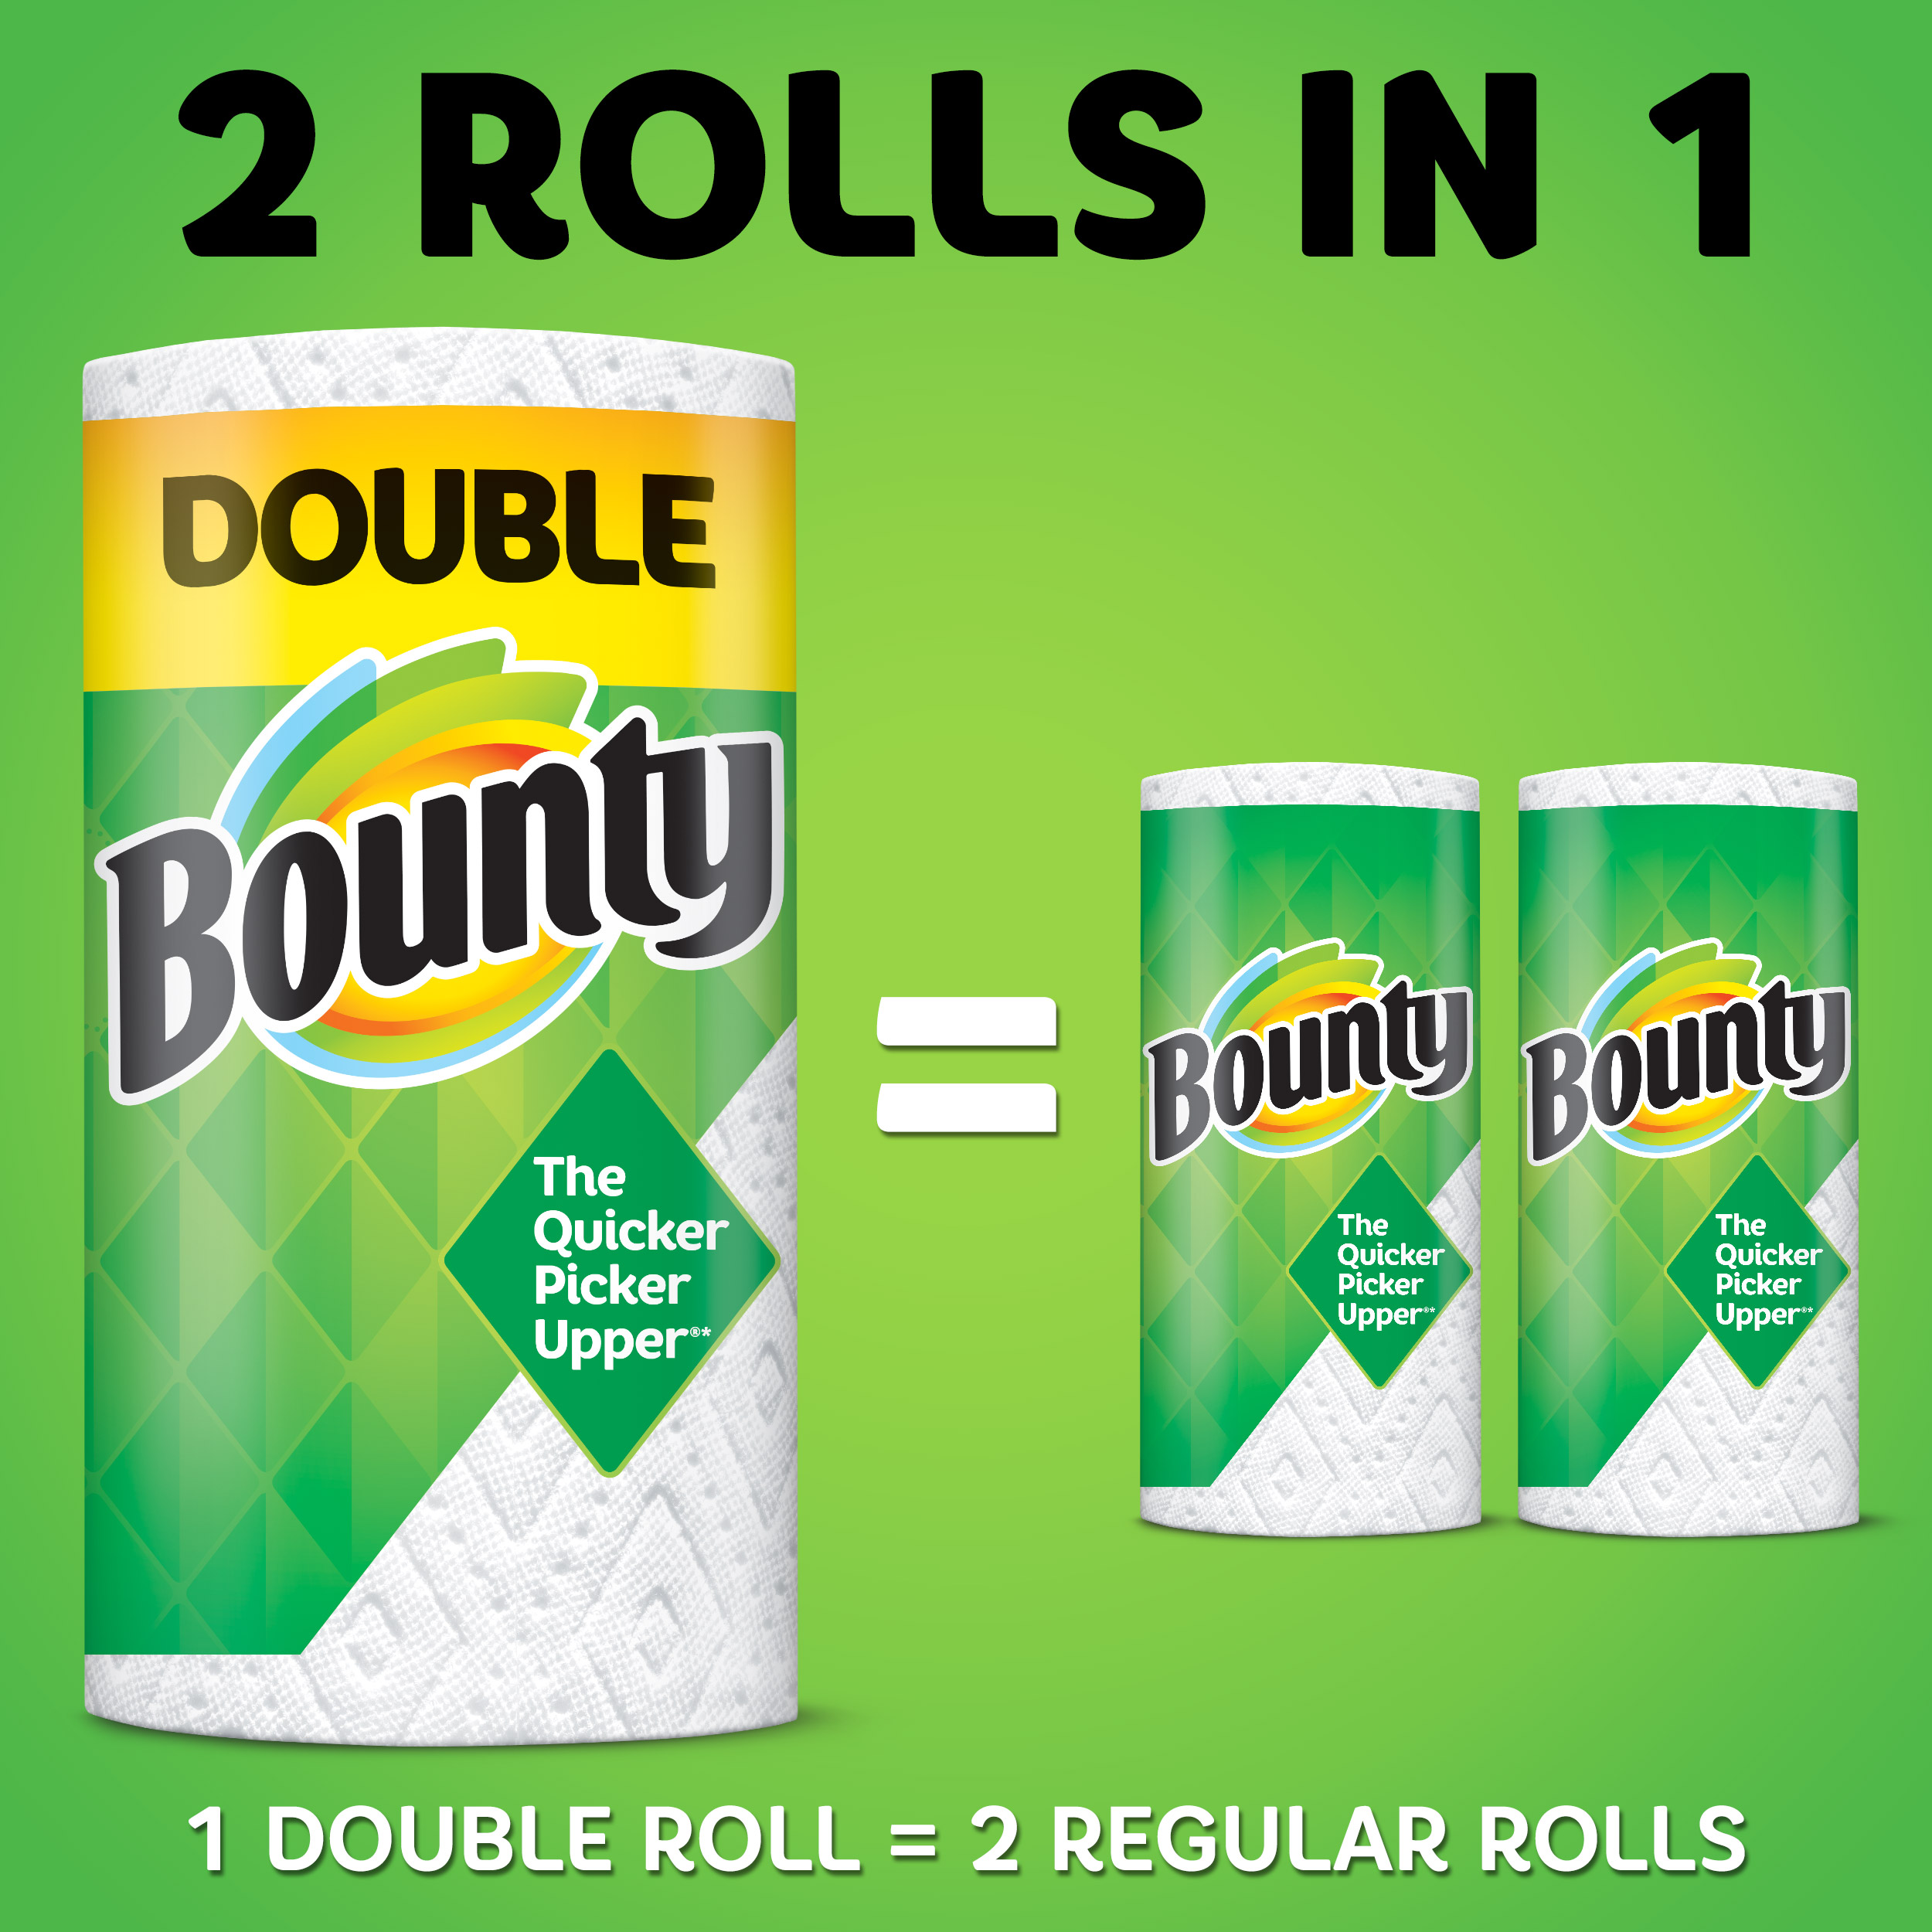 Bounty Bounty Select-A-Size Paper Towels, White, 12 Double Rolls